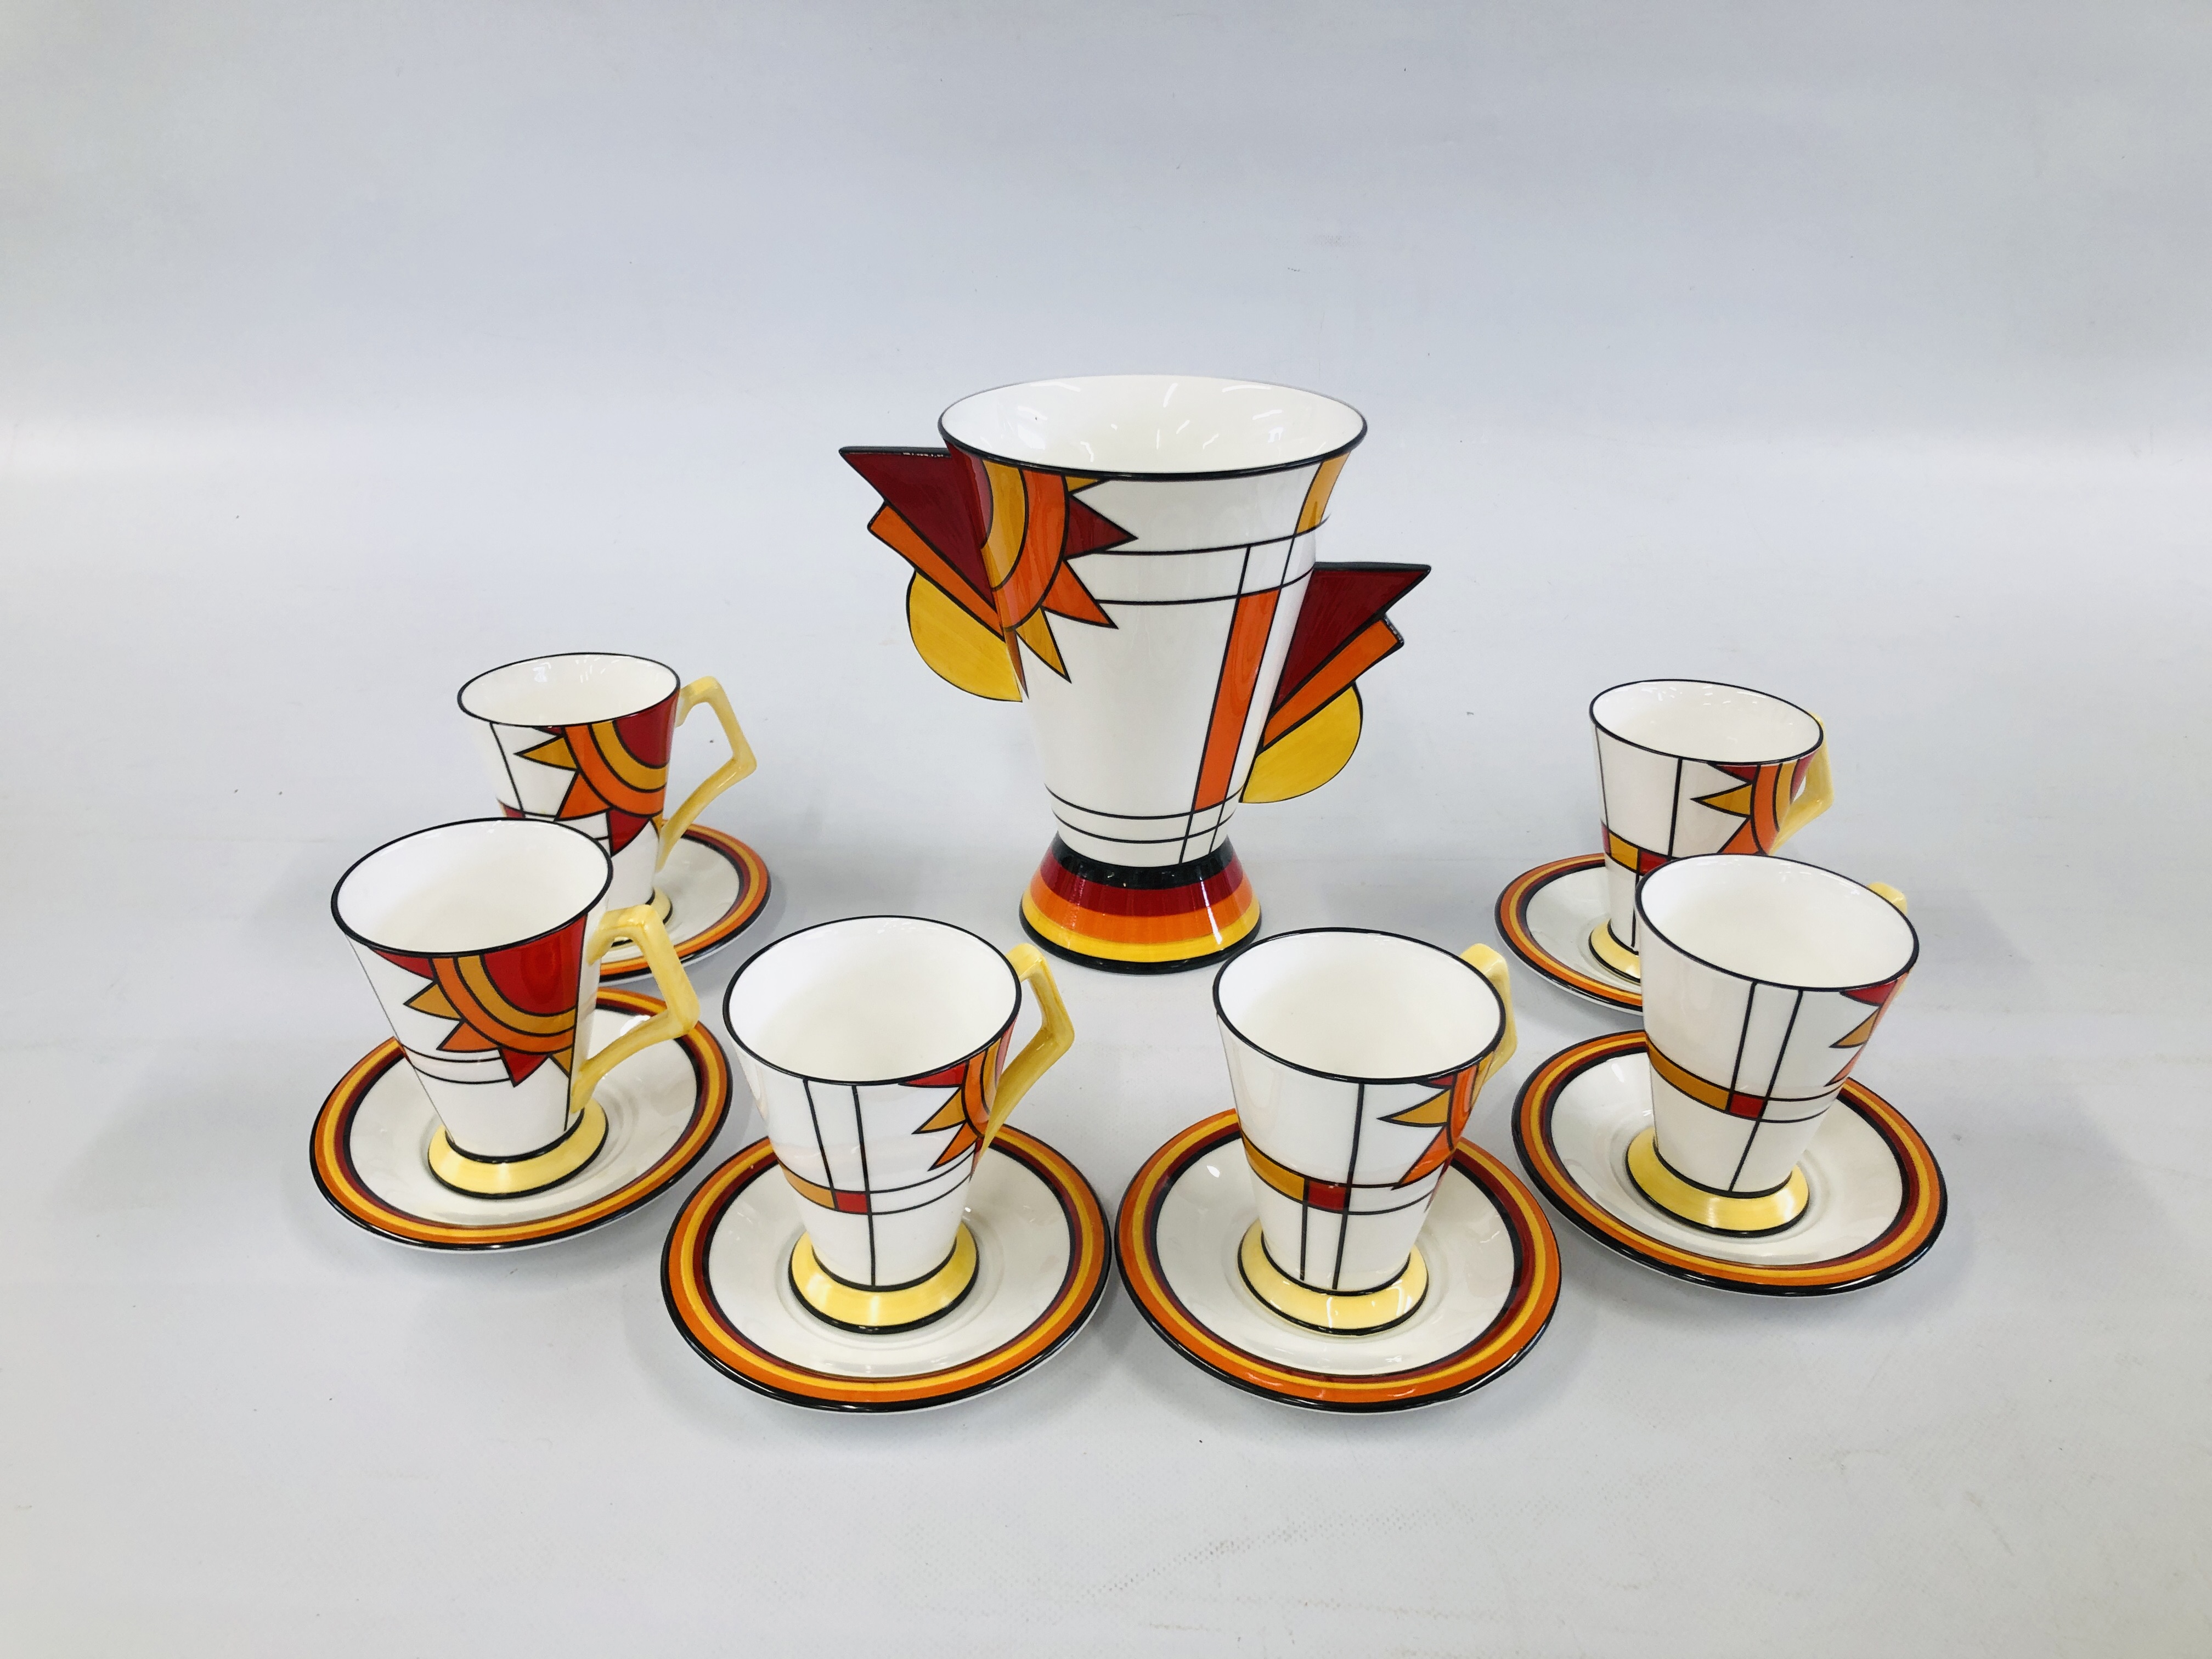 A MODERN ABSTRACT DESIGN 12 PIECE COFFEE CUP SET BY "THE BRIAN WOOD COLLECTION" ALONG WITH A LARGE